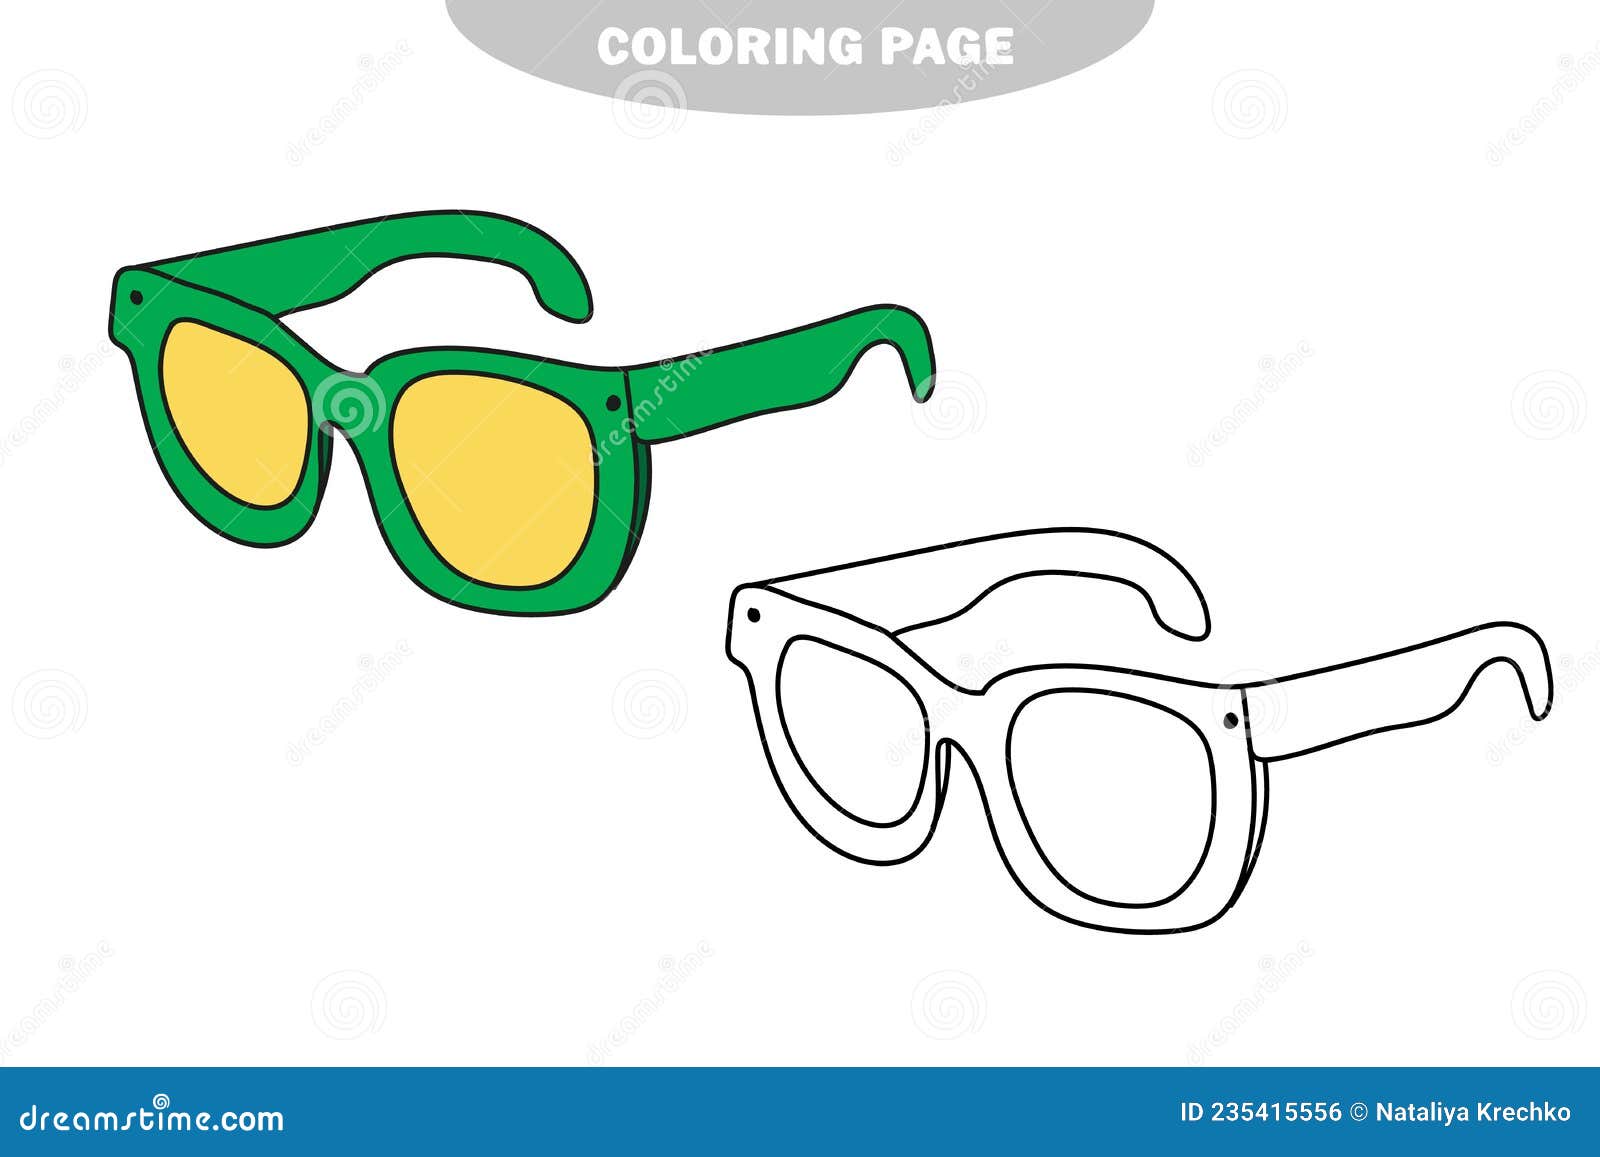 Simple coloring page coloring book for children sunglasses stock vector